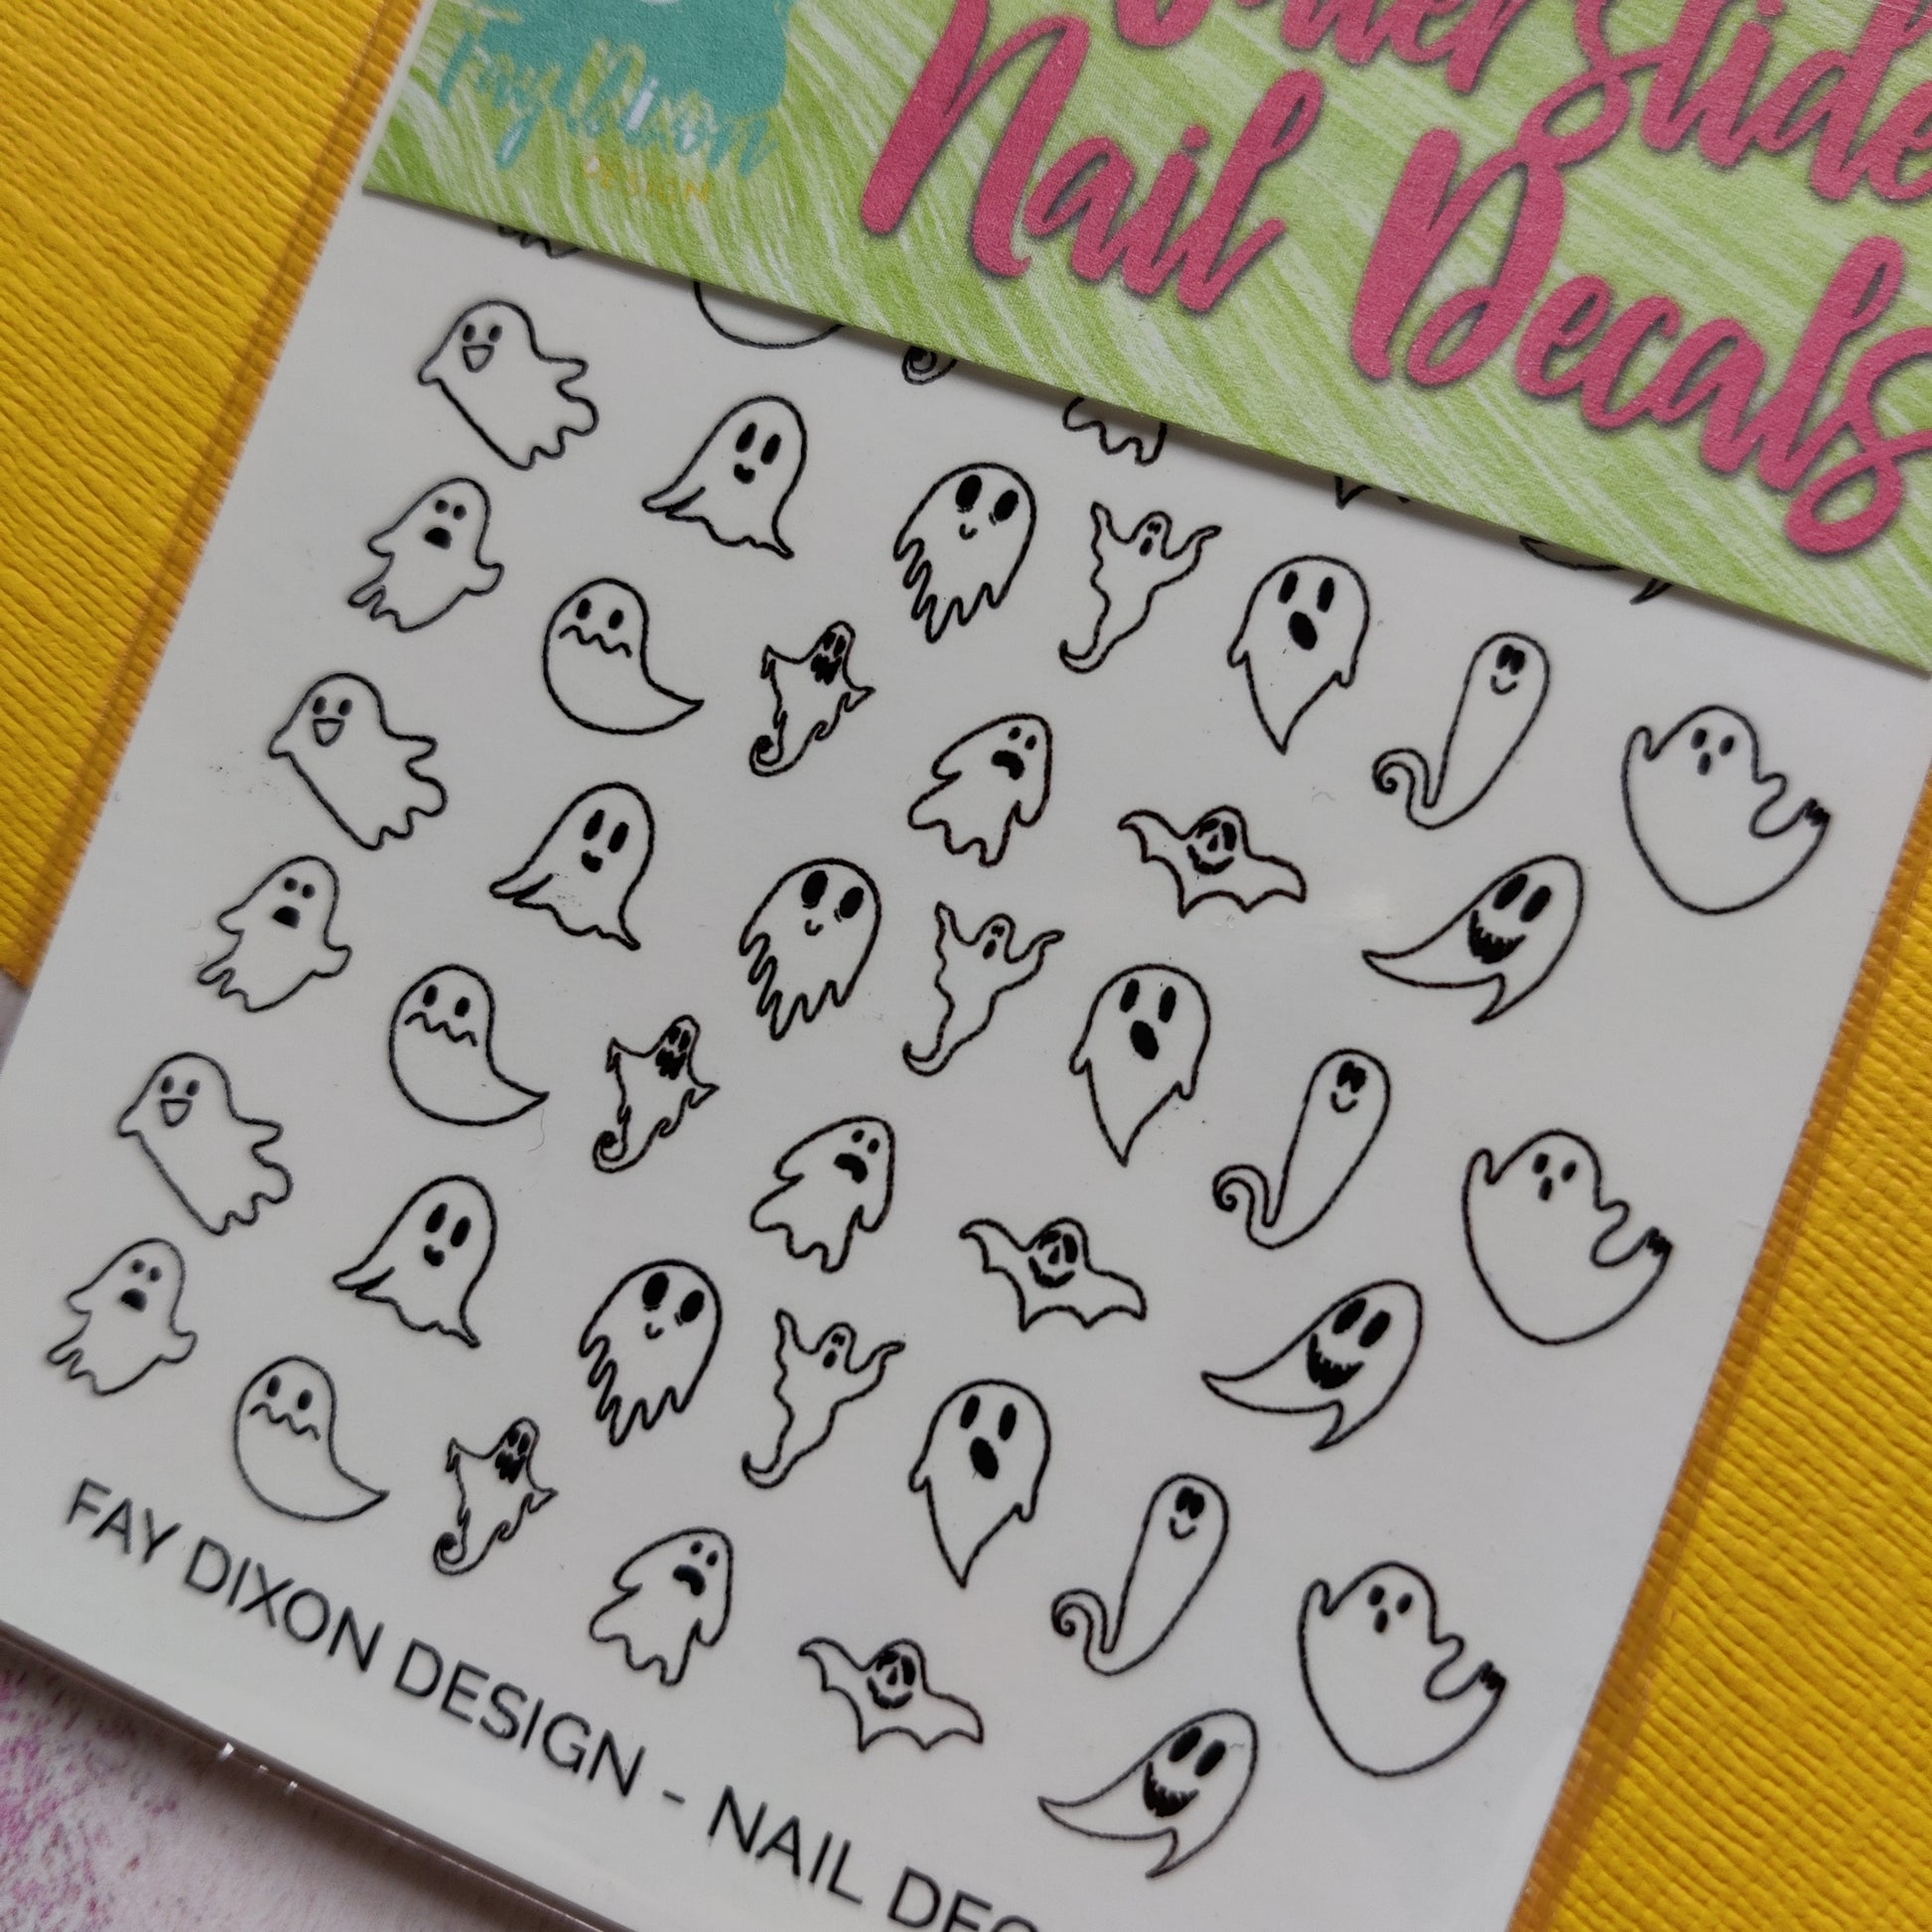 Ghost Waterslide Nail Decals - Fay Dixon Design